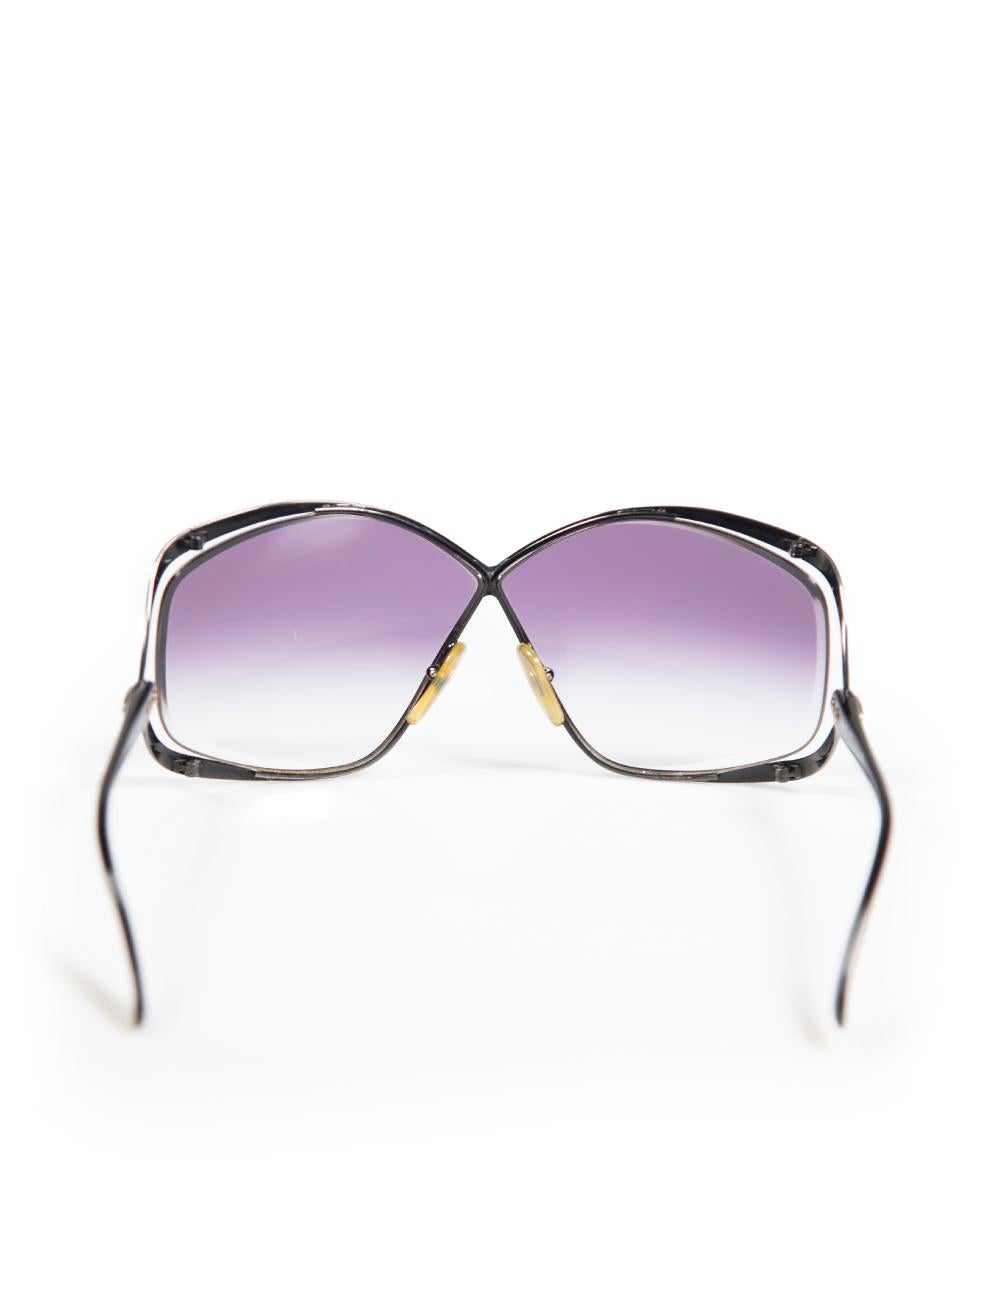 Dior Vintage Purple 2056 90 Butterfly Sunglasses In Good Condition For Sale In London, GB